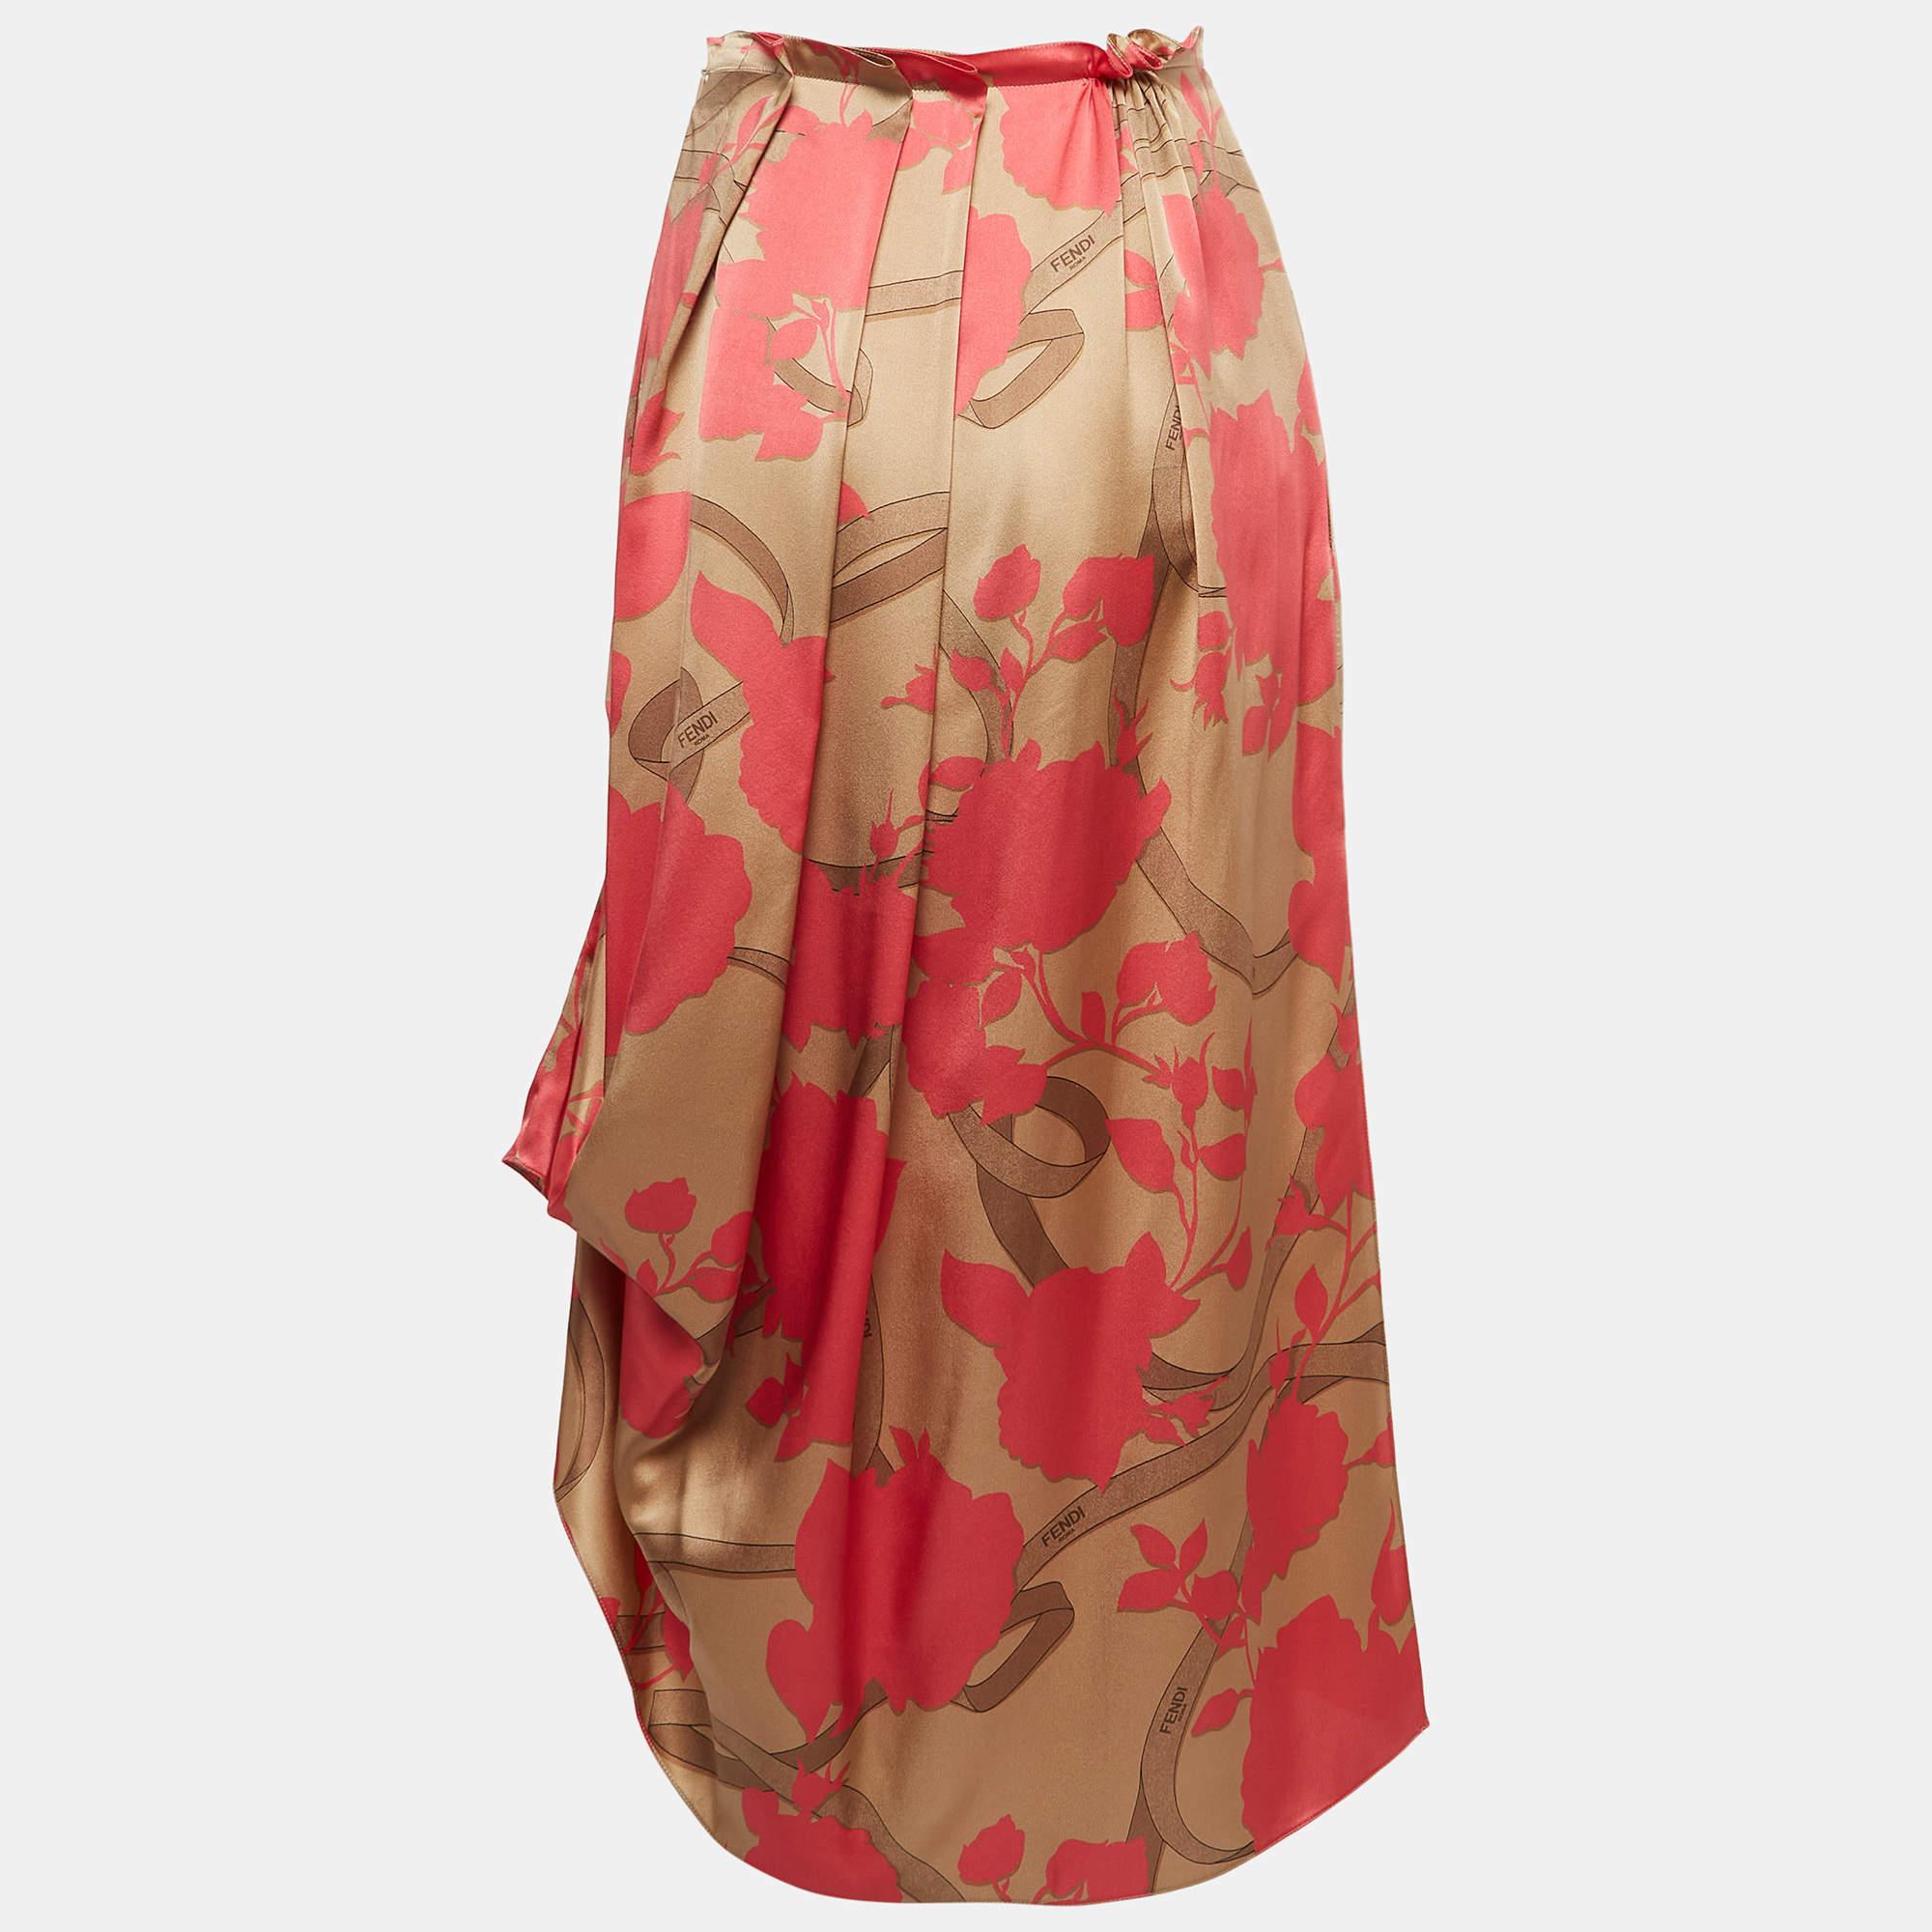 This elegant skirt is worth adding to your closet! Crafted from fine materials, it is exquisitely designed into a flattering shape.

